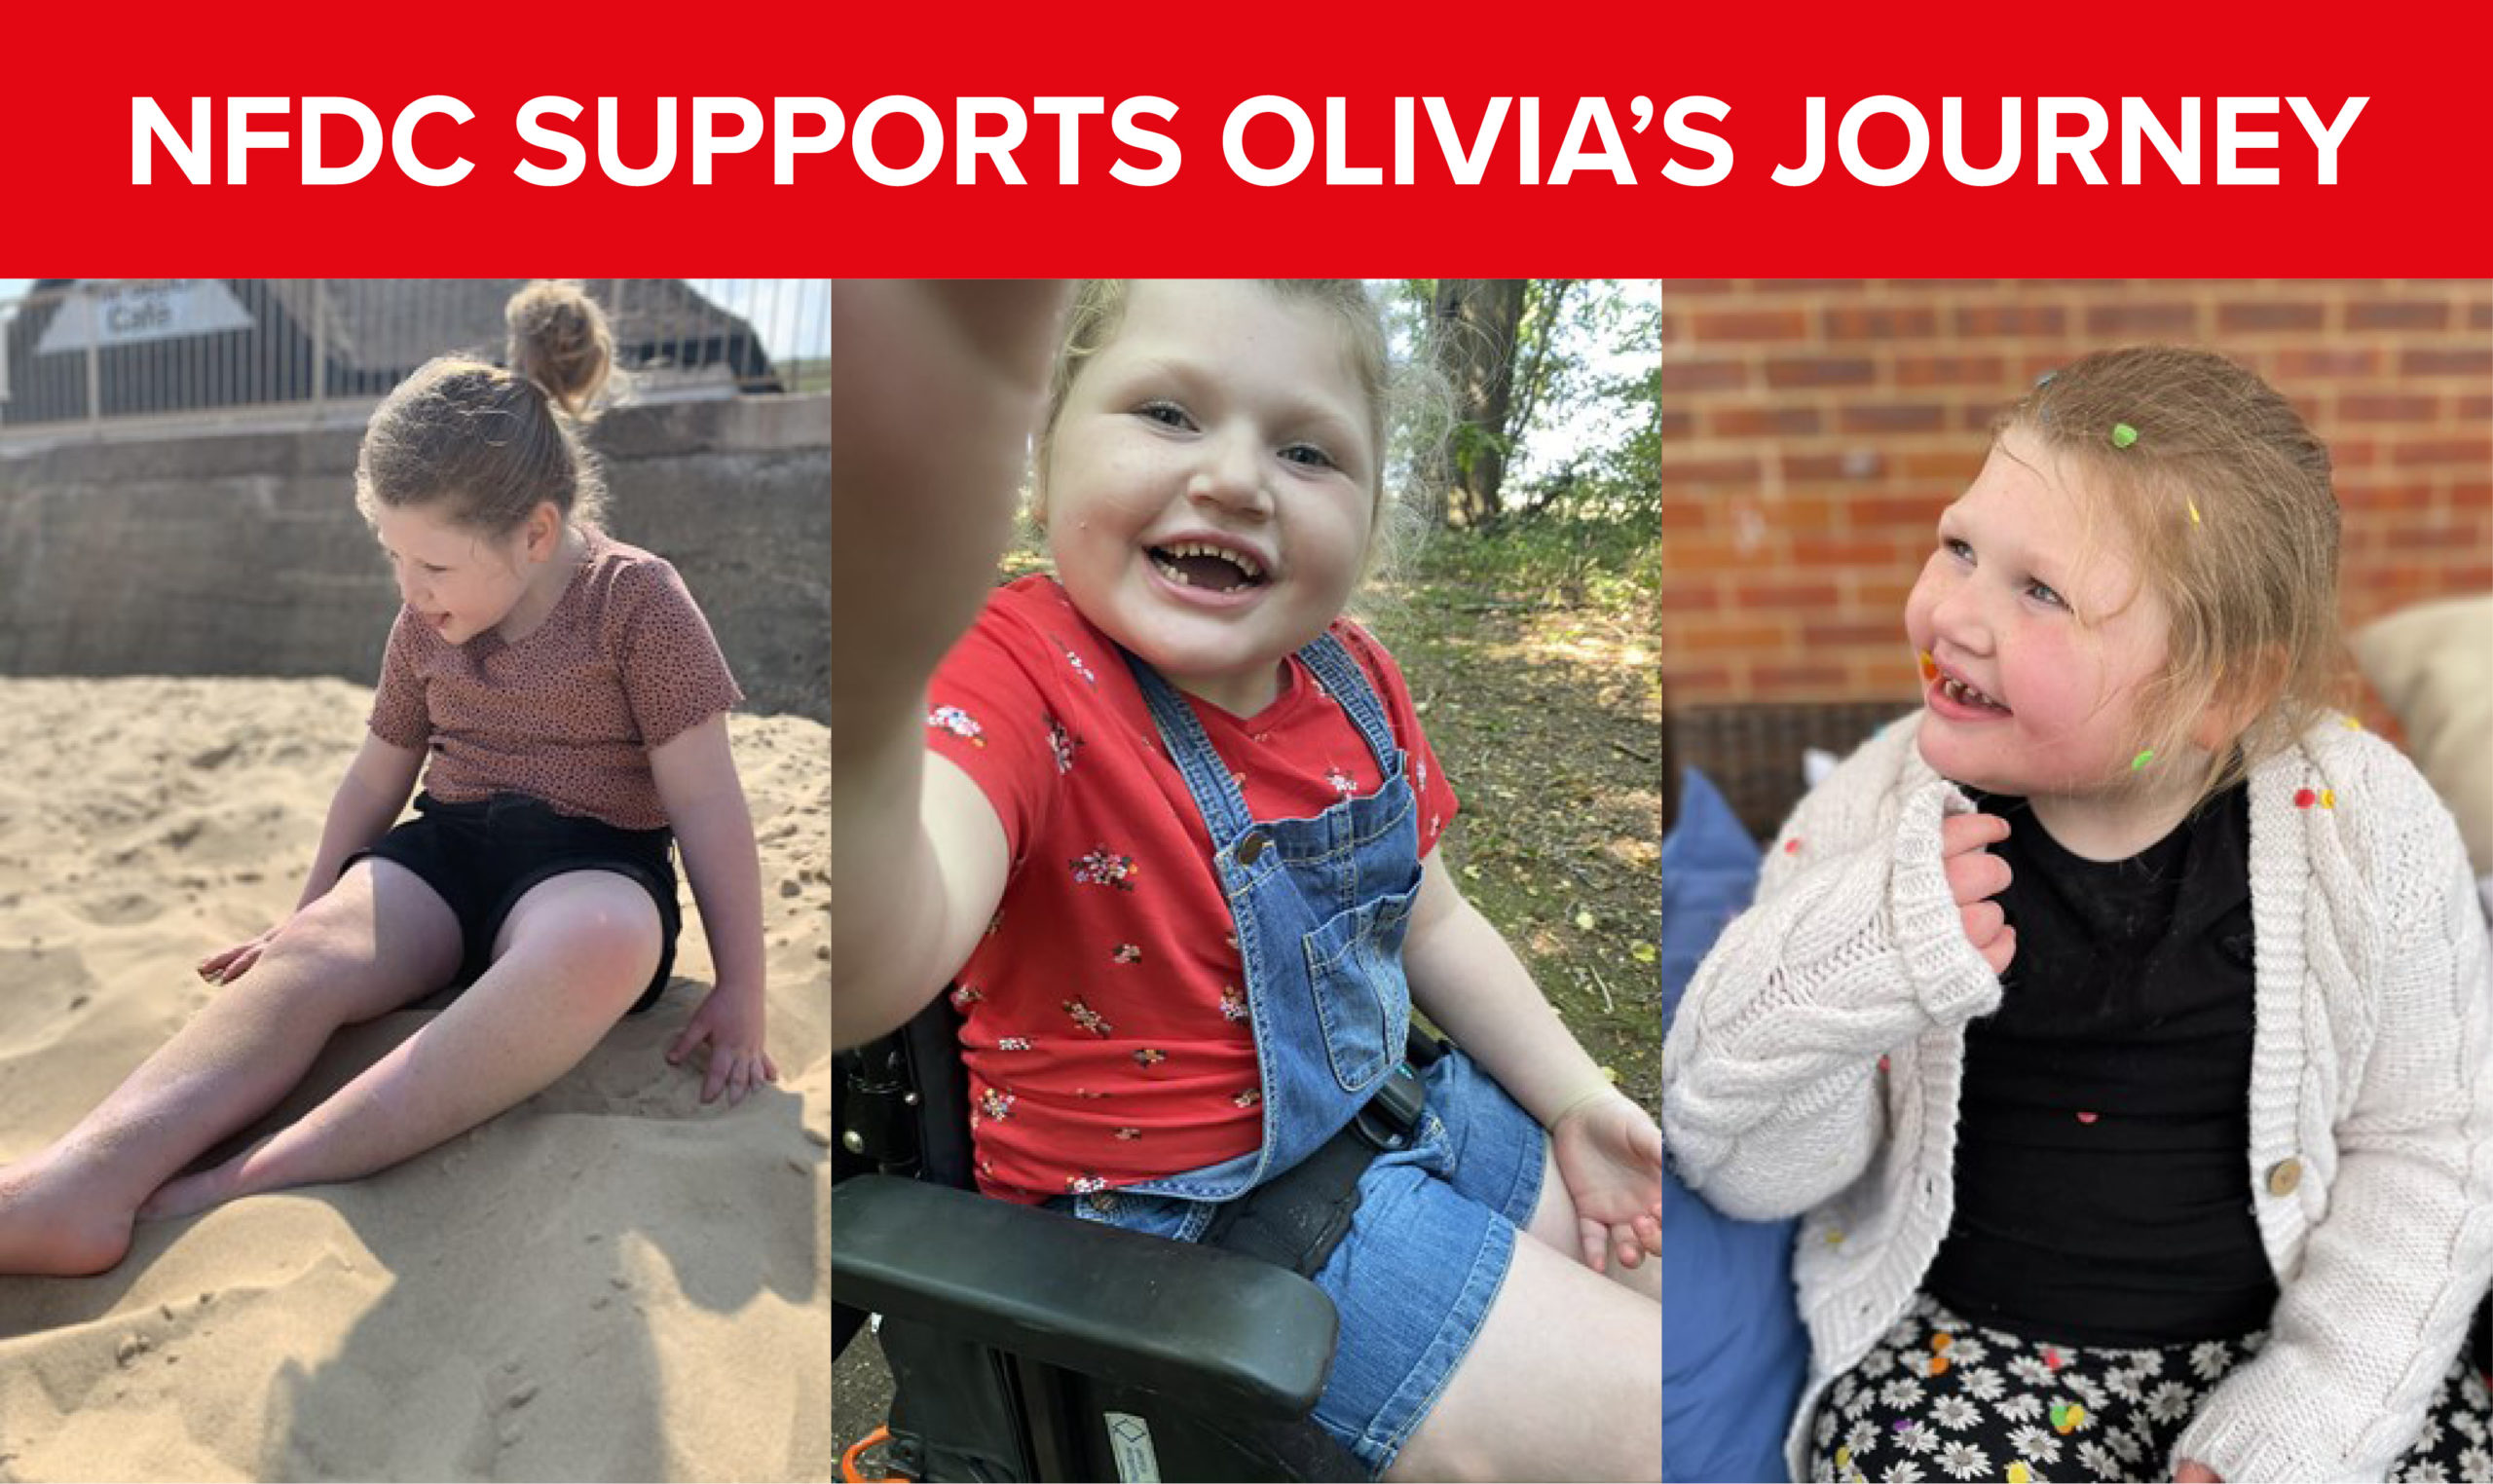 NFDC support Olivia’s journey